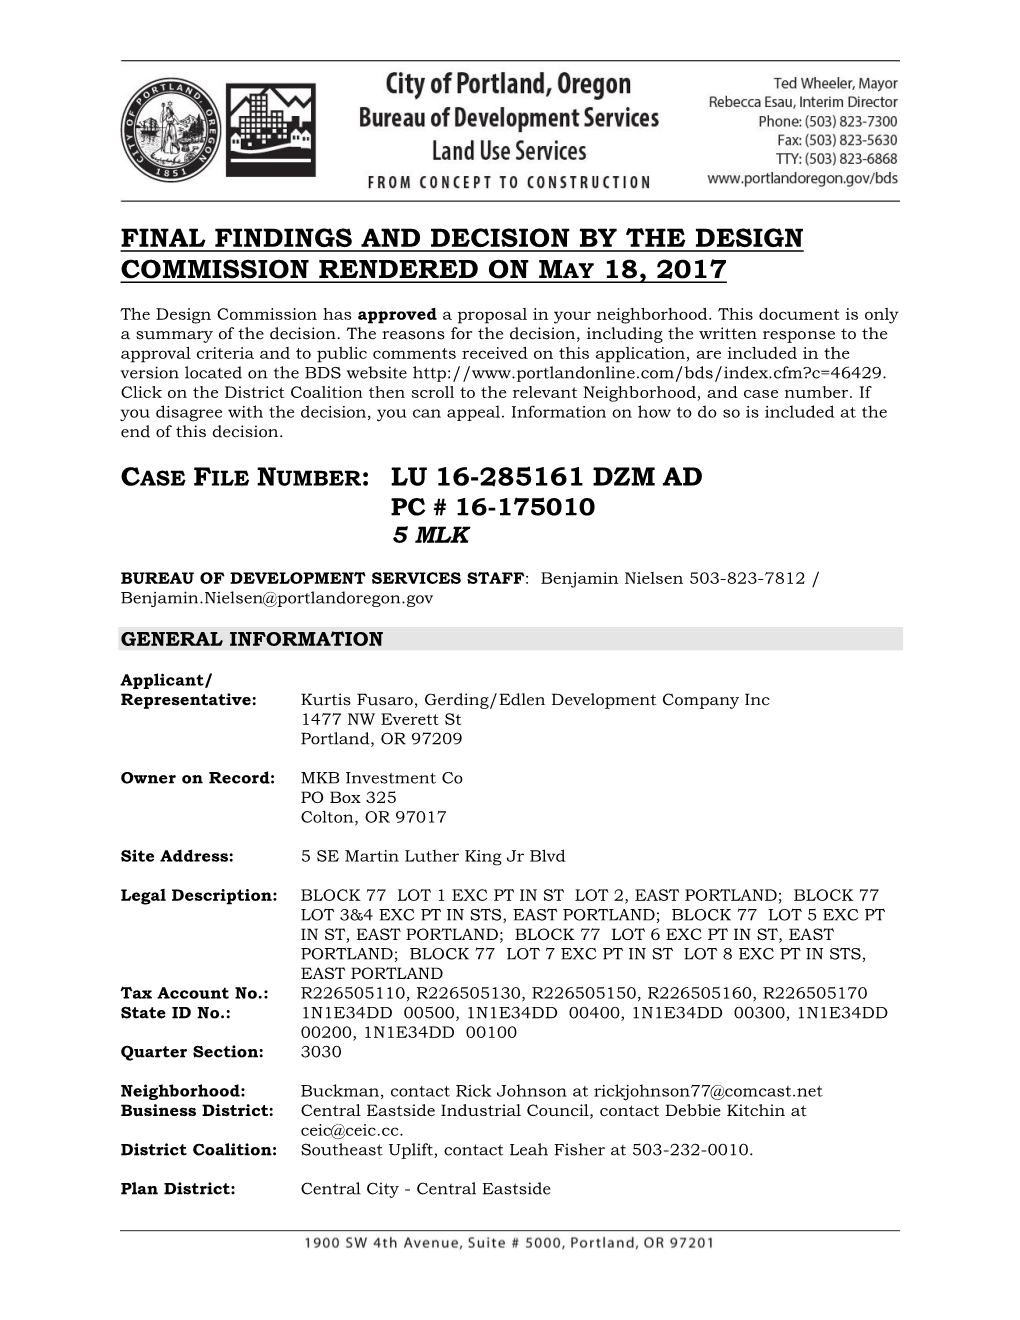 Final Findings and Decision by the Design Commission Rendered on May 18, 2017